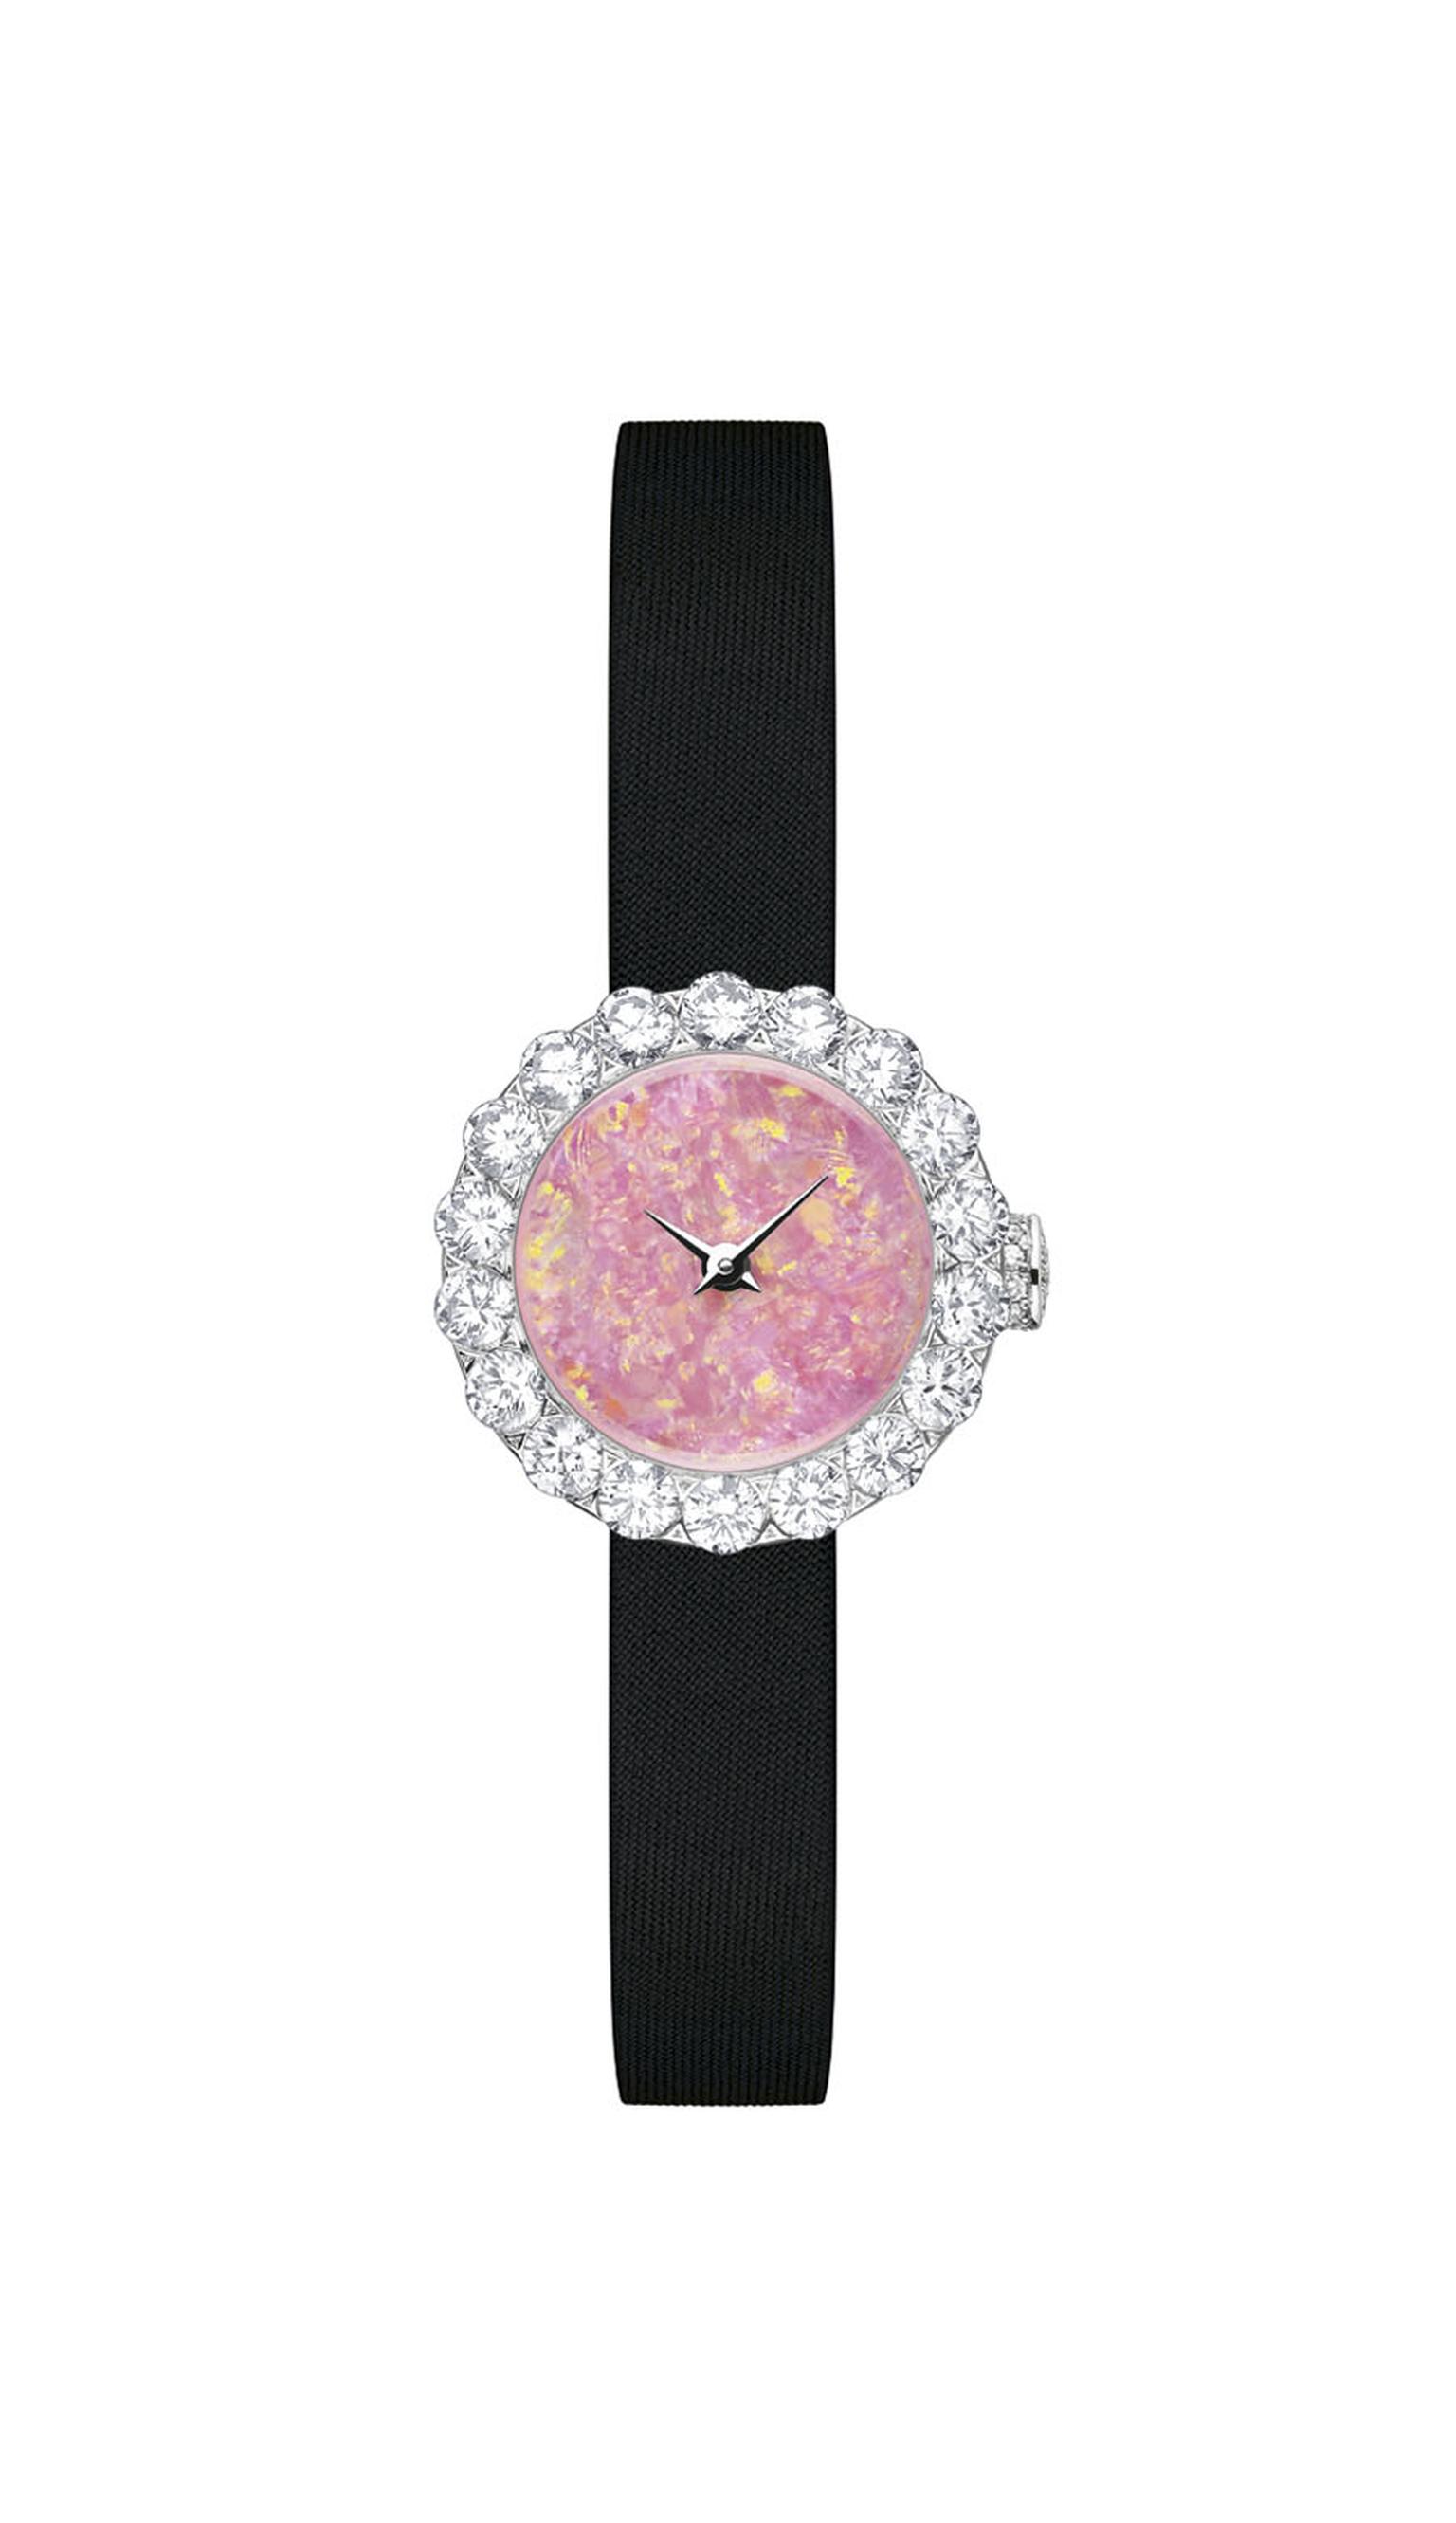 La D de Dior Preciéuse 21mm high jewellery watch in white gold with an Australian opal dial surrounded by diamonds.